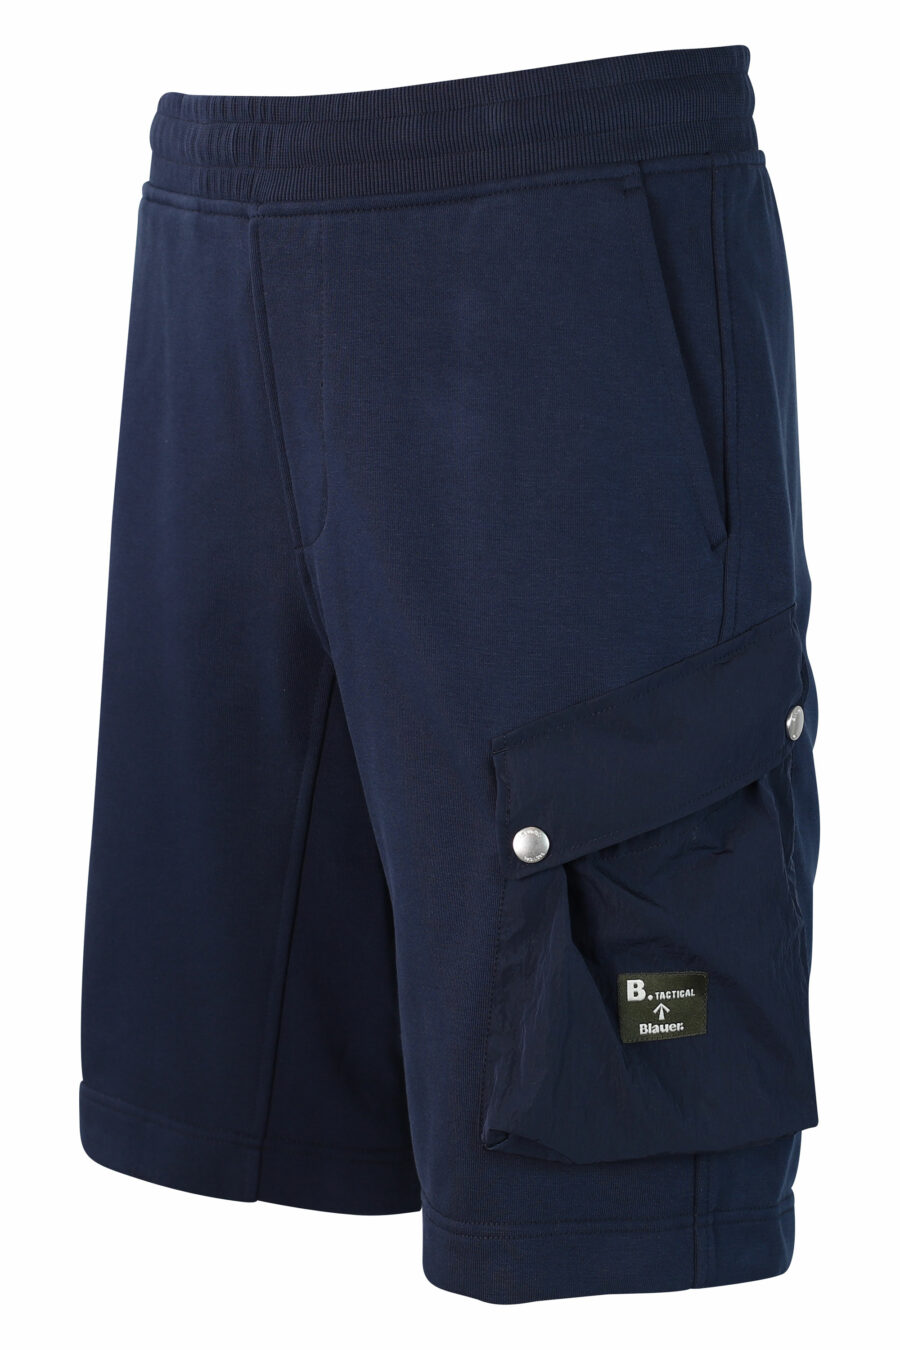 Tracksuit bottoms blue with side pocket - IMG 9873 1